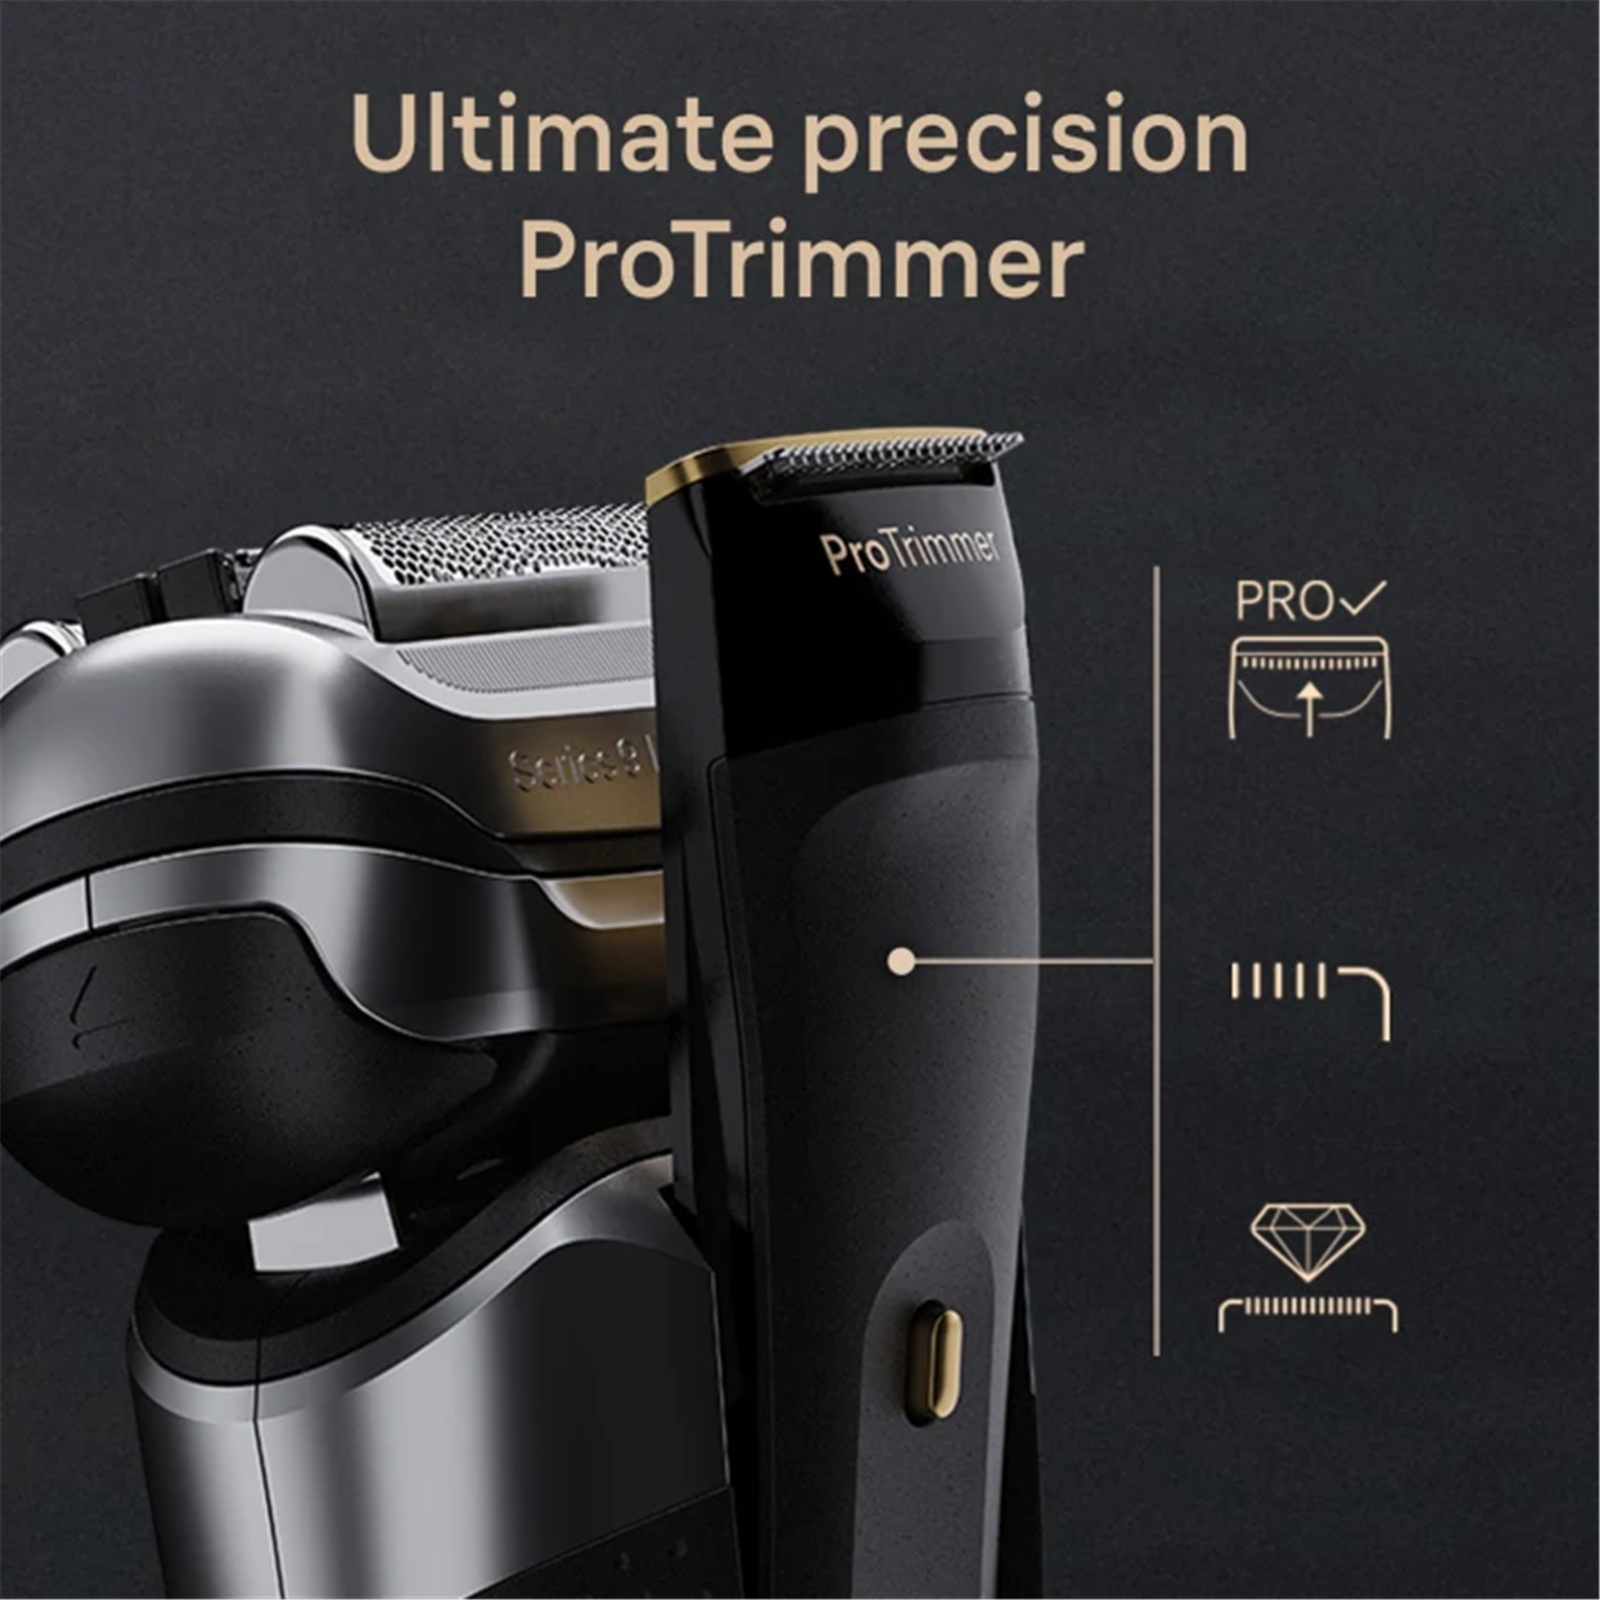 Buy the Braun Series 9 Pro 9567CC Wet & Dry Shaver with 6-in-1 SmartCare  ( 9567CC ) online - /au